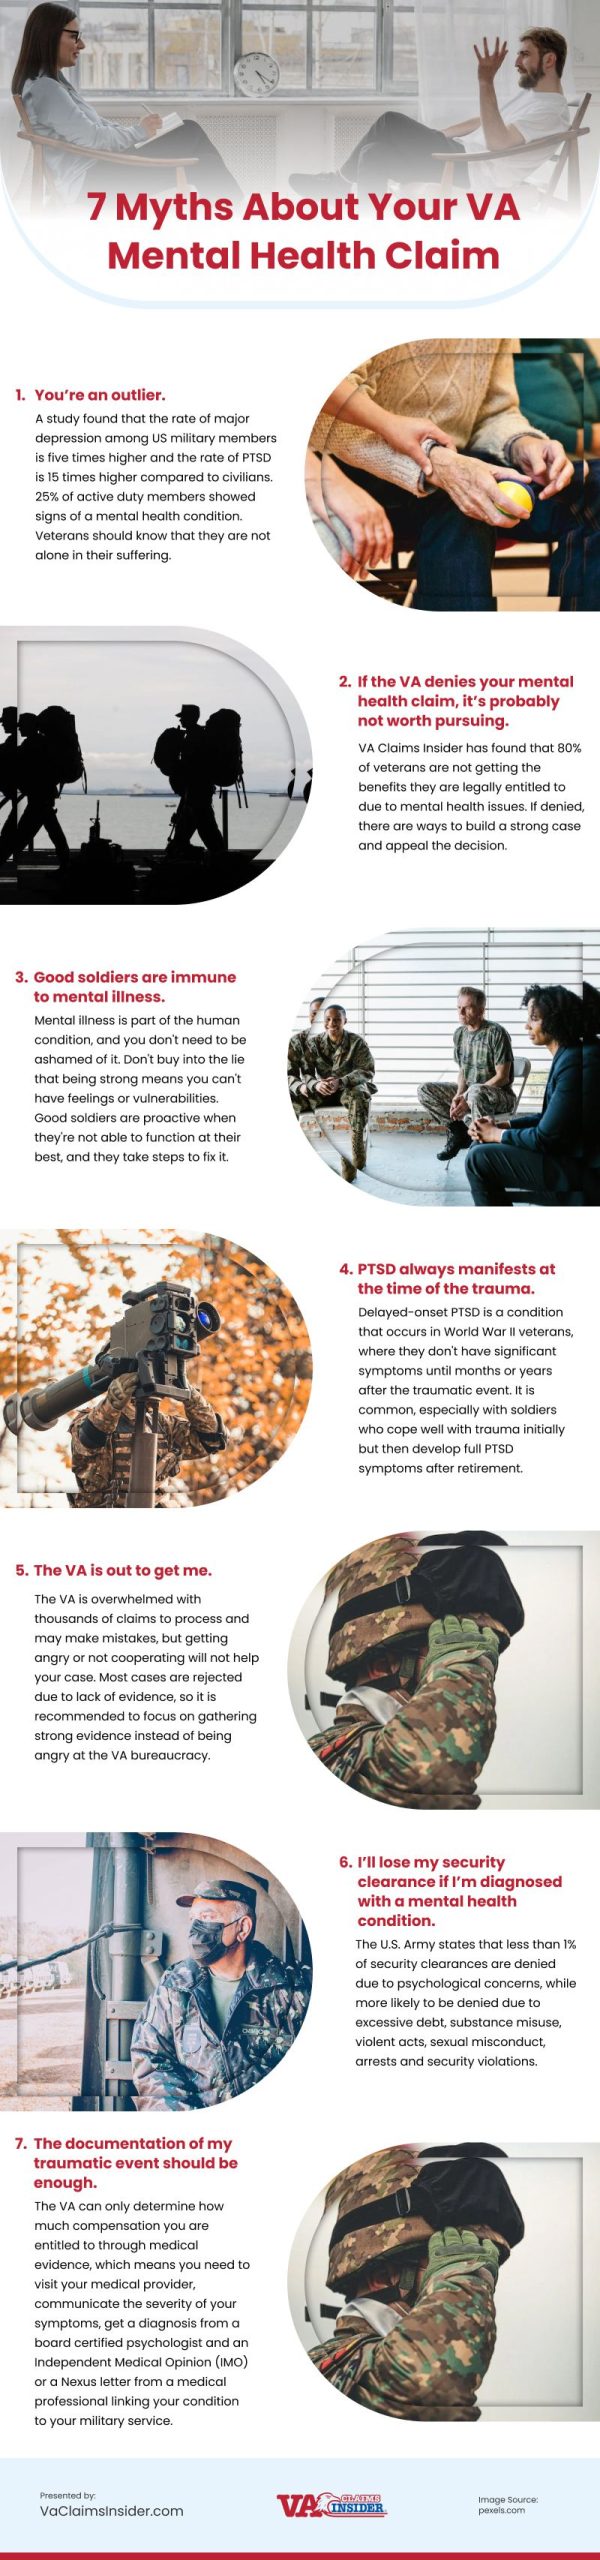 7 Myths About Your VA Mental Health Claim Infographic